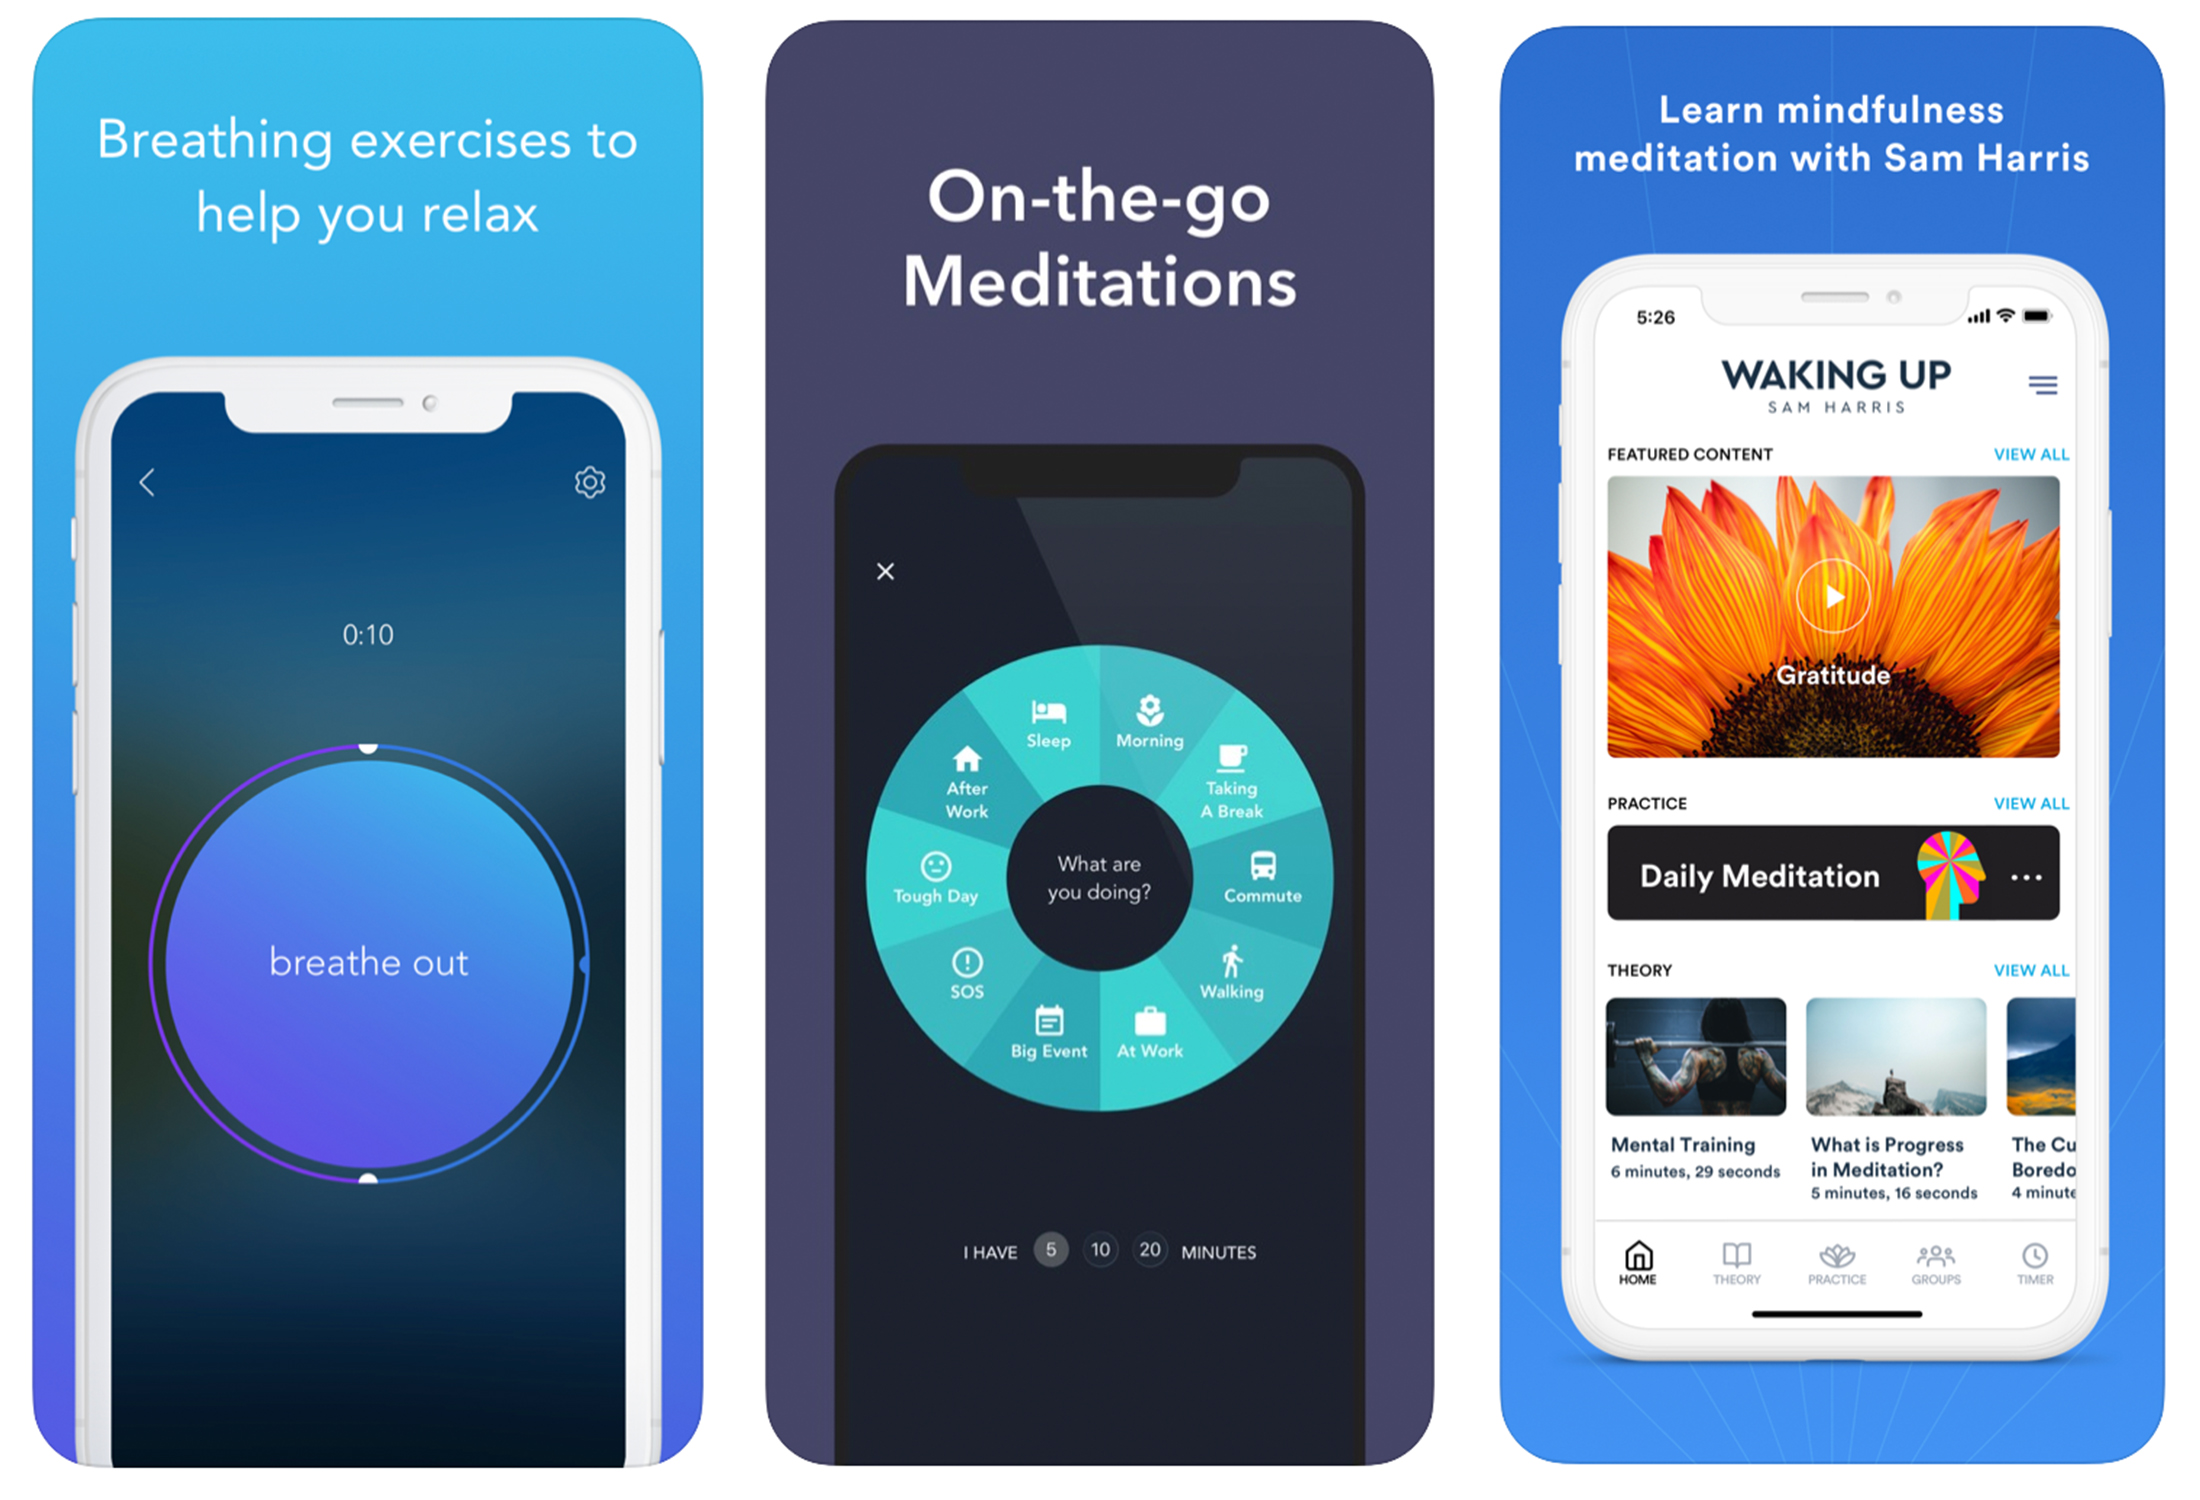 With the Calm App it Is Possible to Meditate and Relax after a Busy Day